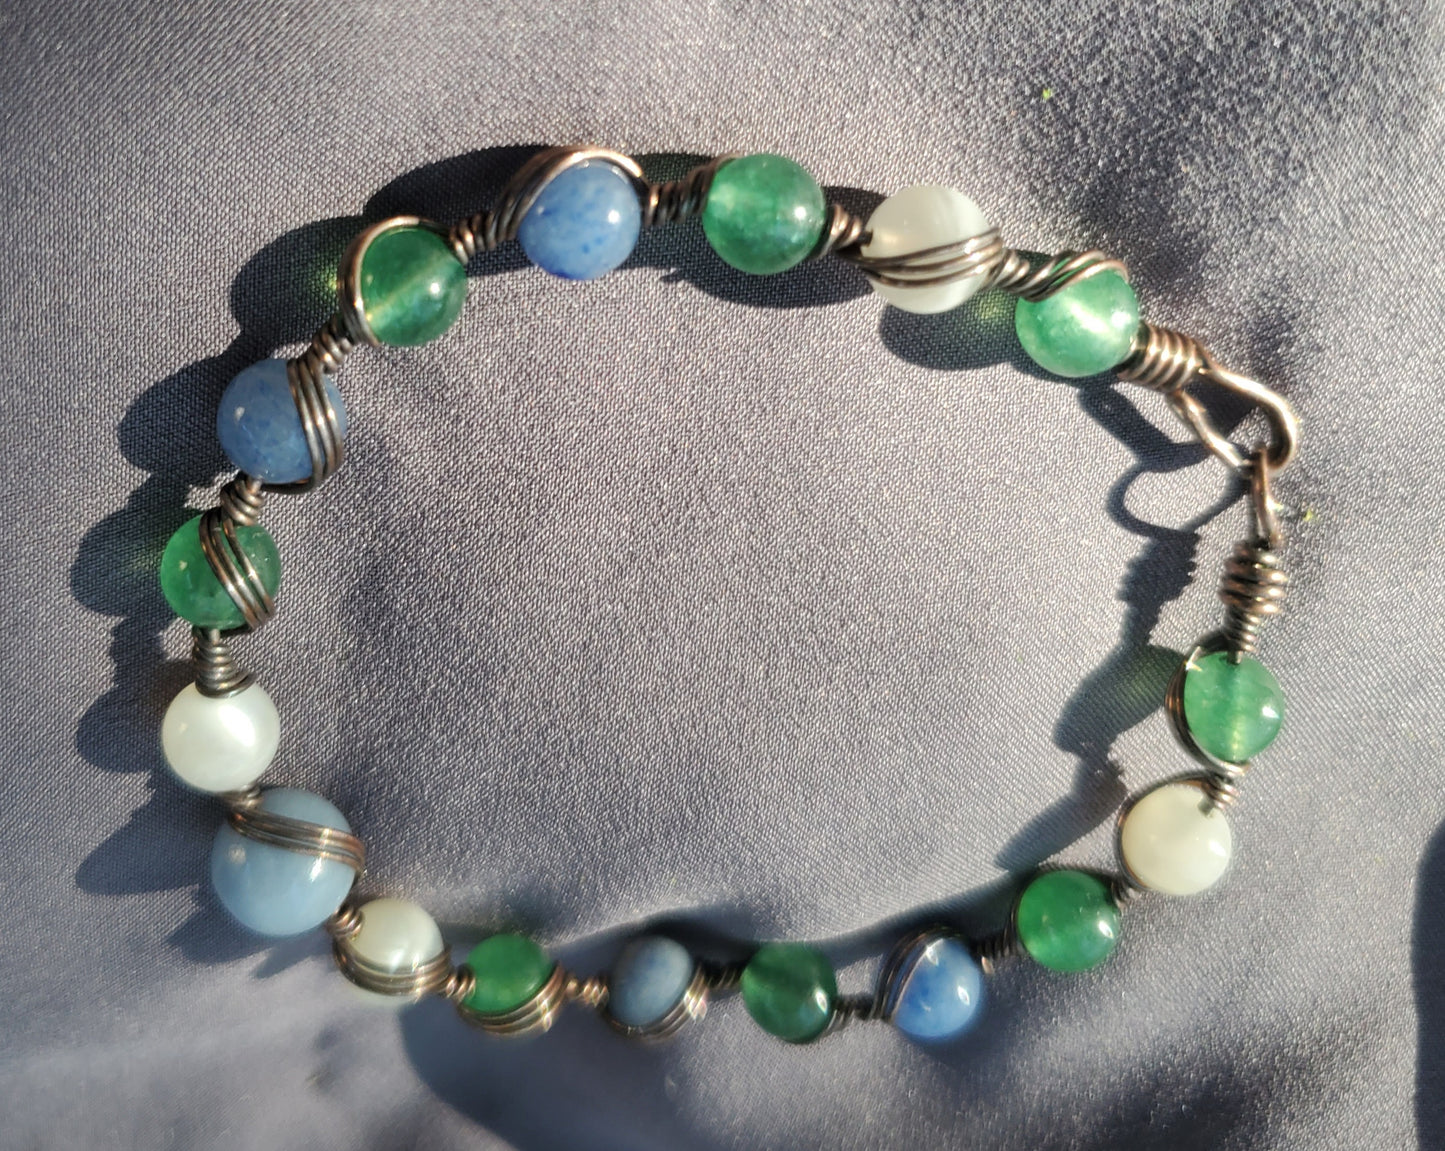 Wire Wrapped Bracelet with Angelite, Moonstone, and Aventurine